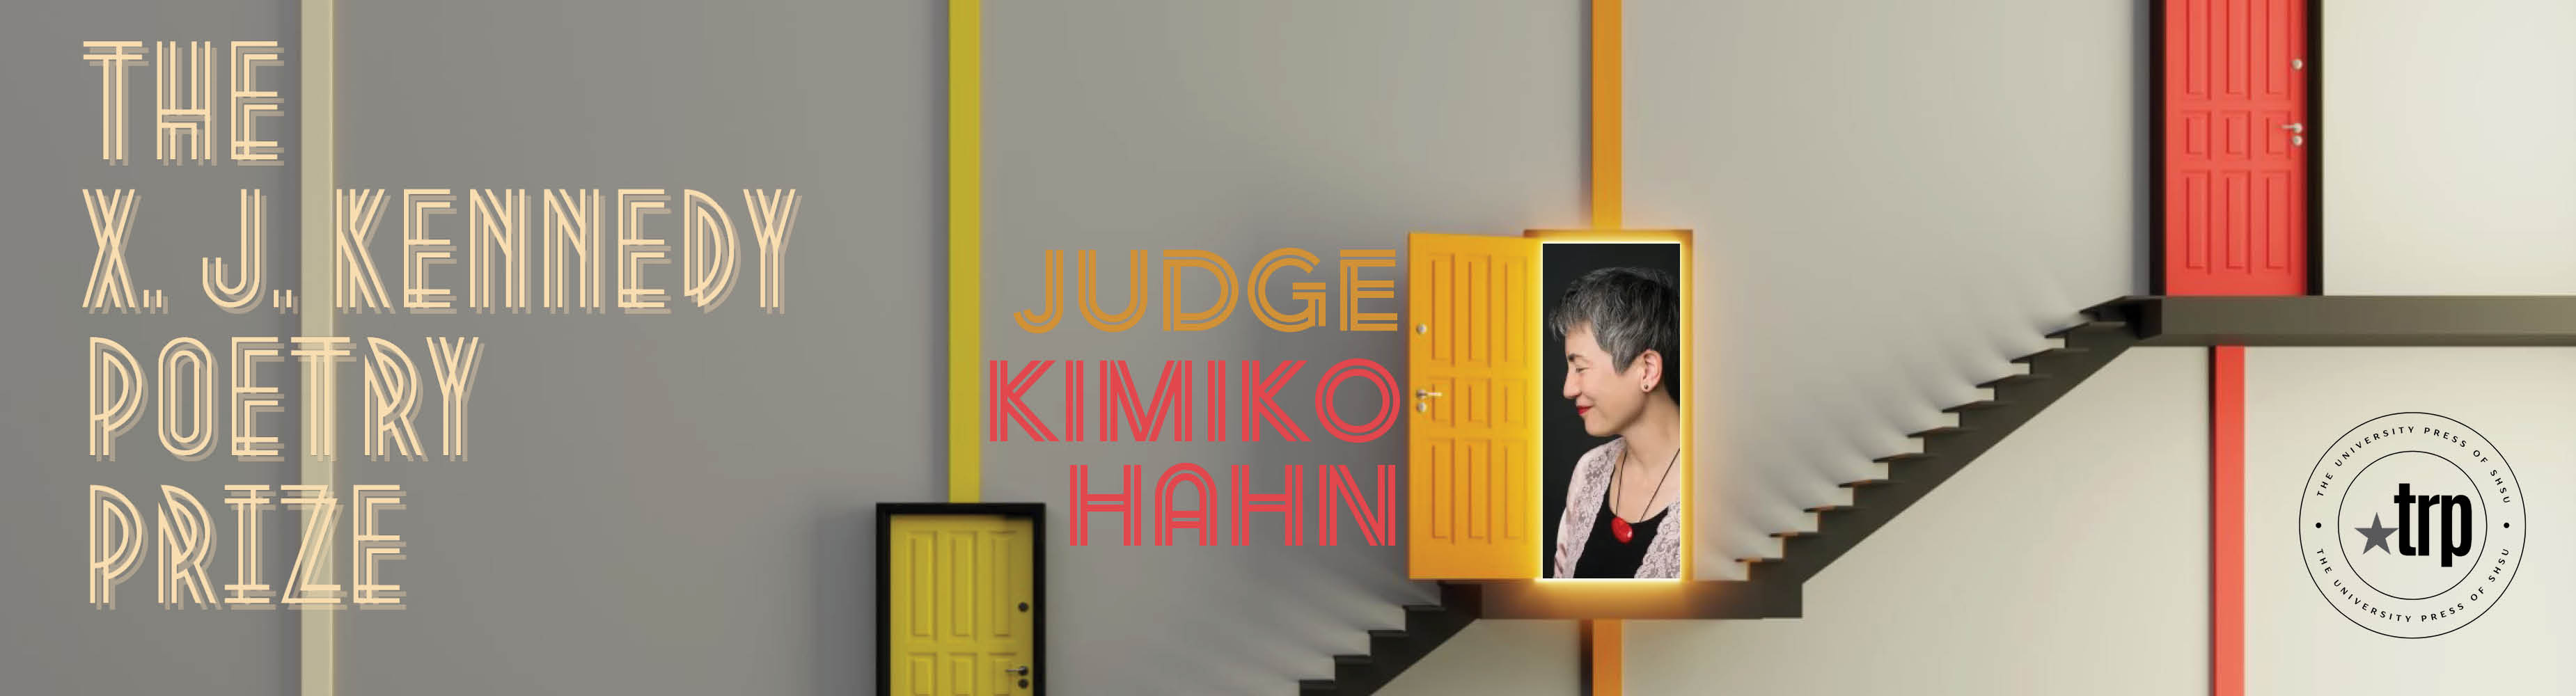 The X. J. Kennedy Poetry Prize. 2022 Judge: Kimiko Hahn. Yellow, red, and orange doors on stairs, against grey background.